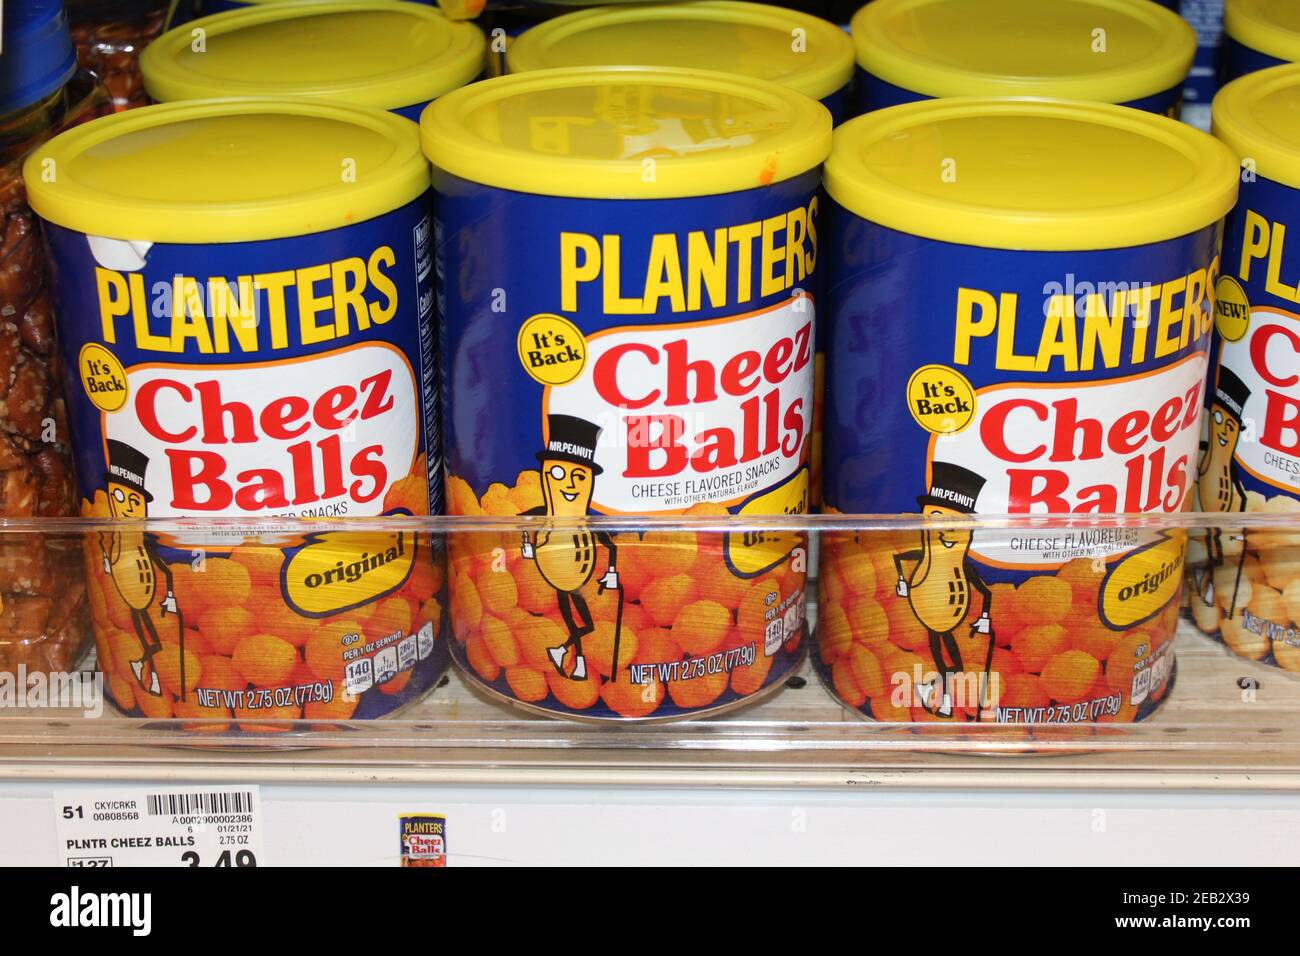 Planters Cheese Balls in a bright and colorful container shot closeup at a grocery store in Kansas on a metal shelf. Stock Photo